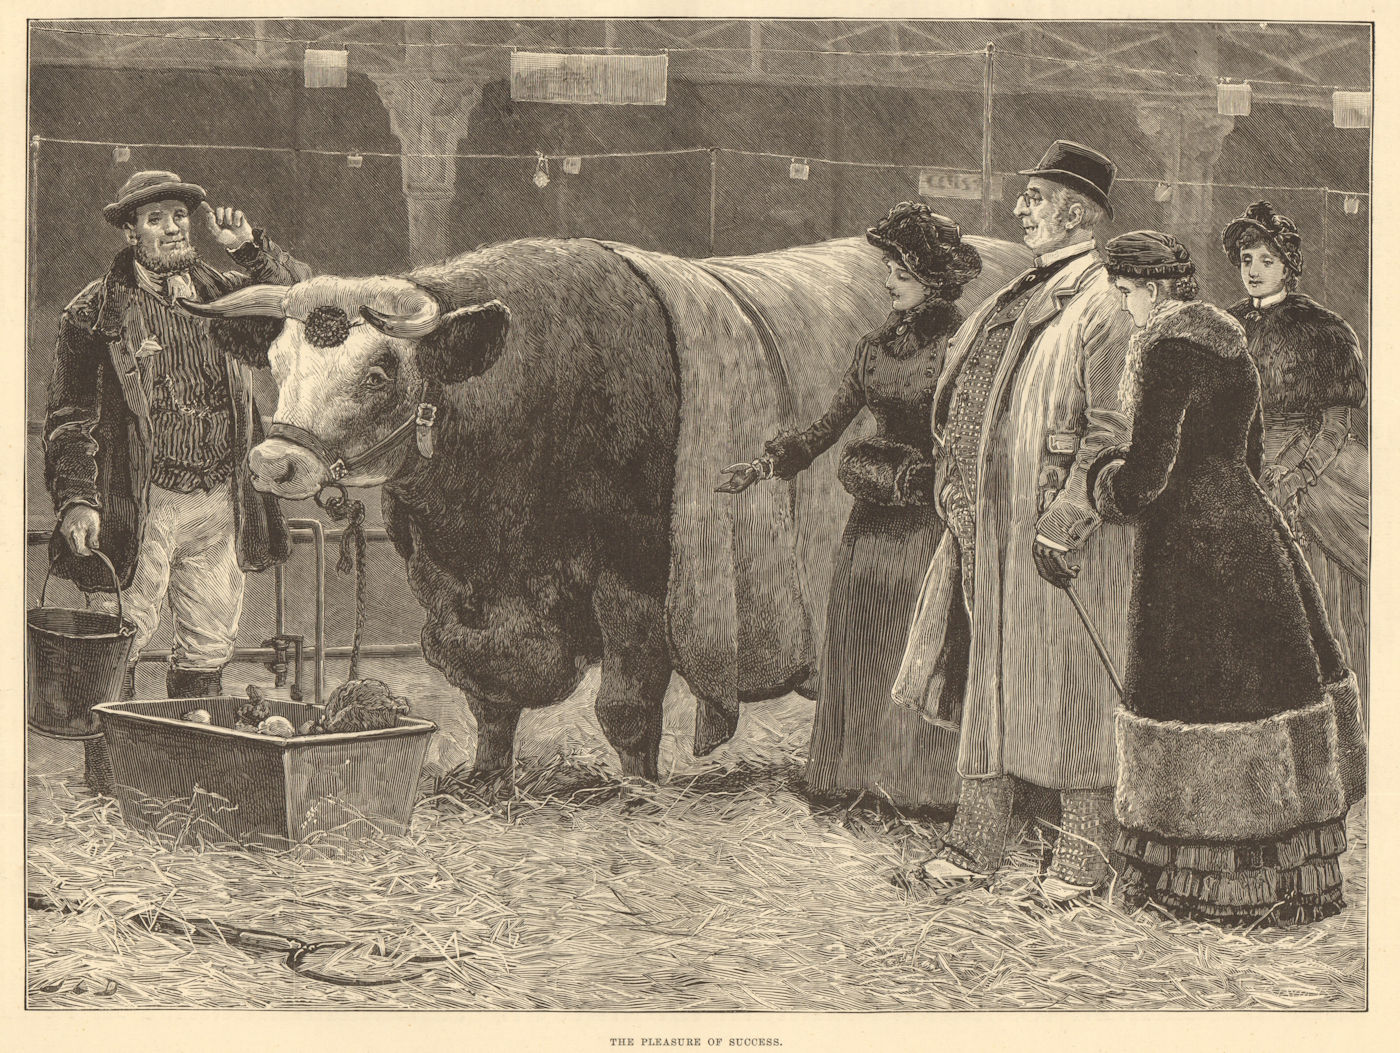 Associate Product The pleasure of success. Prize bull. Cows 1883 old antique print picture